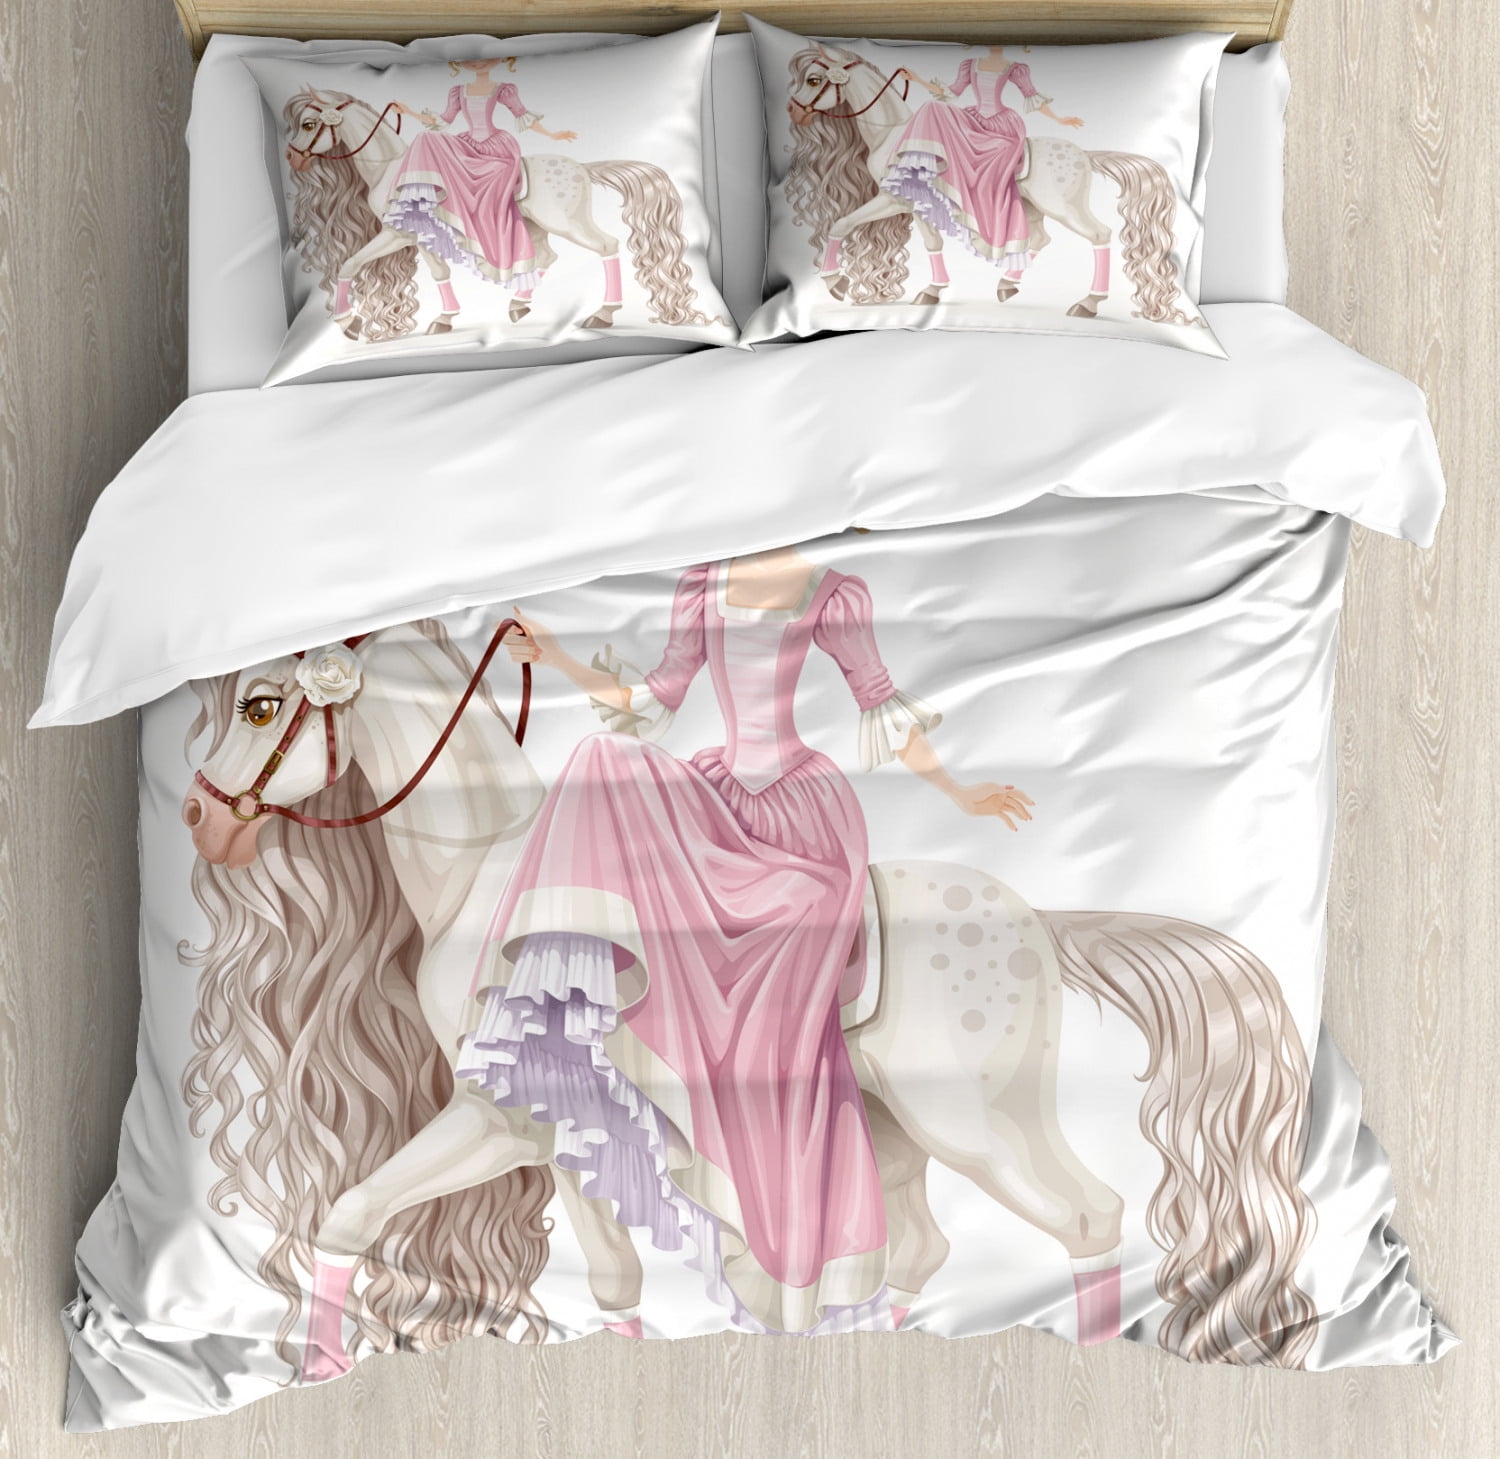 Teen Girls Queen Size Duvet Cover Set, Pretty Smiling Princess on A ...